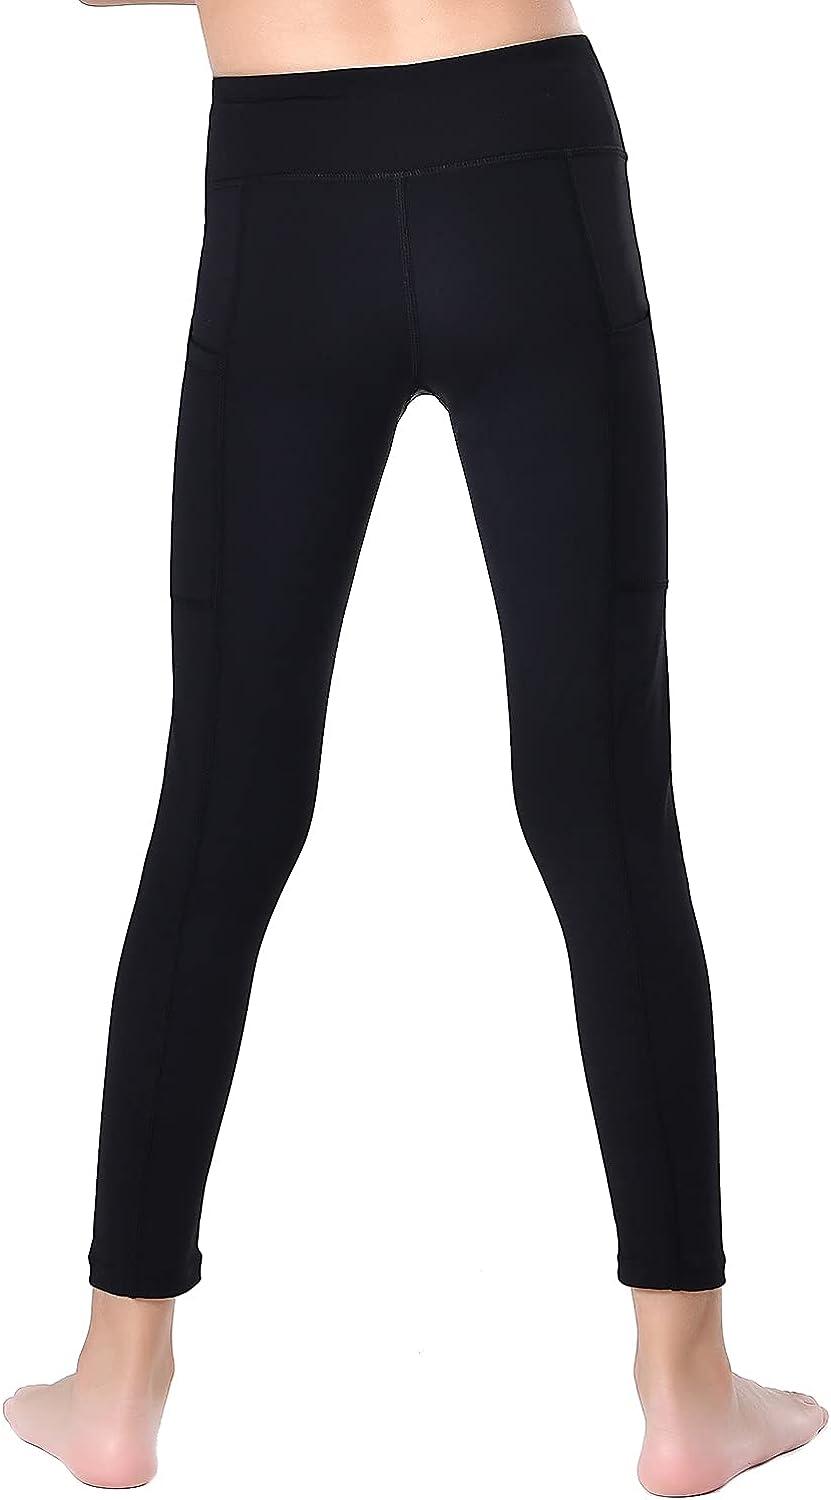 Youth Athletic Dance Leggings with Side Pockets UK